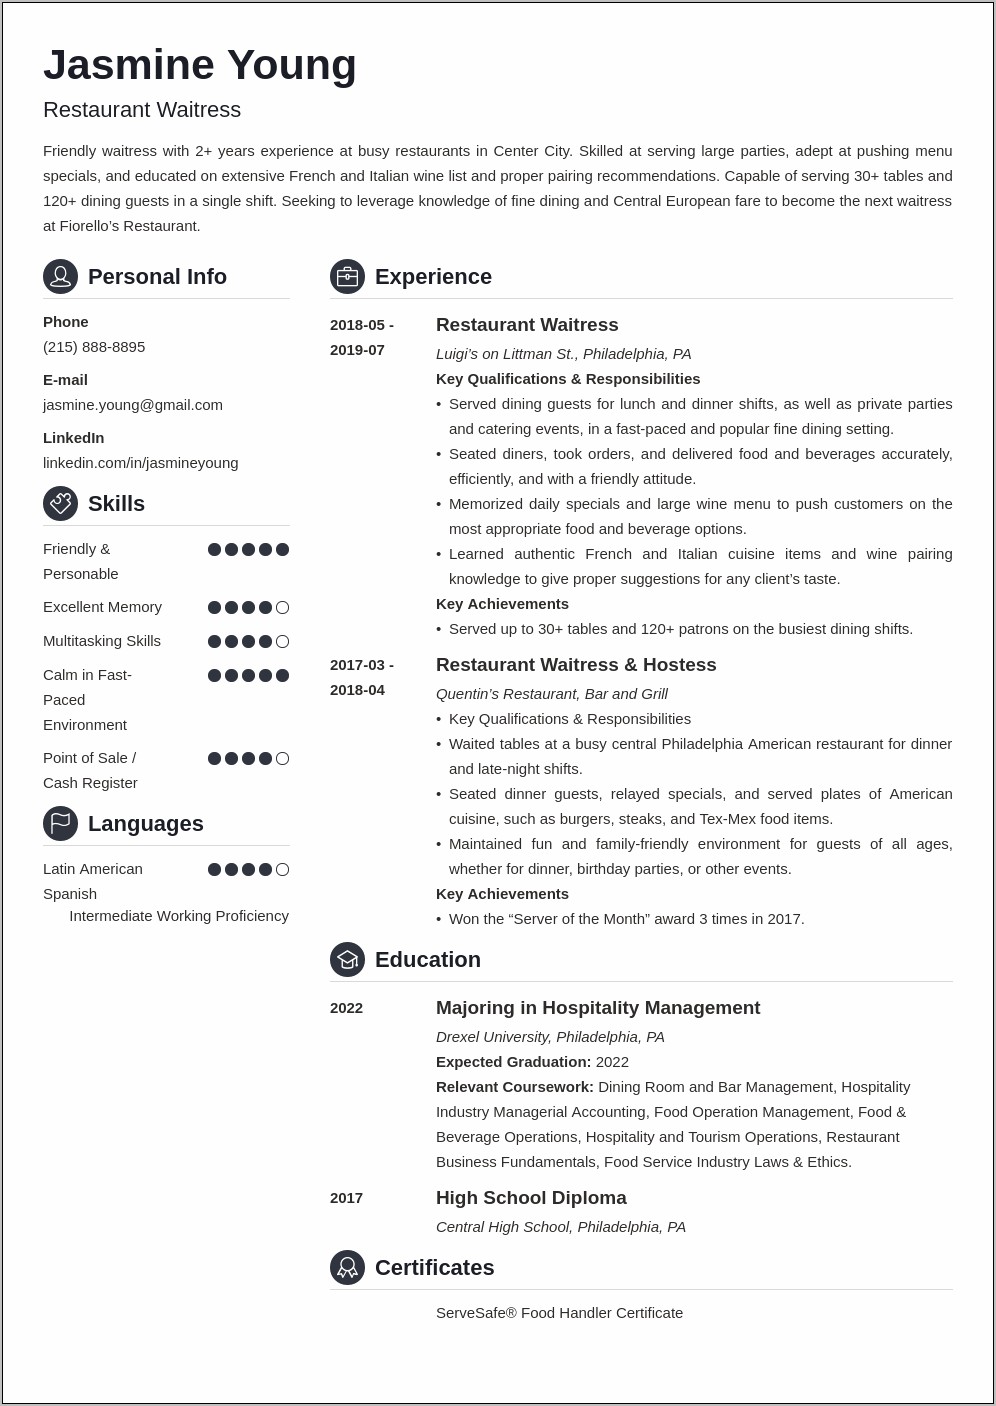 resume-writing-tips-for-first-job-resume-example-gallery